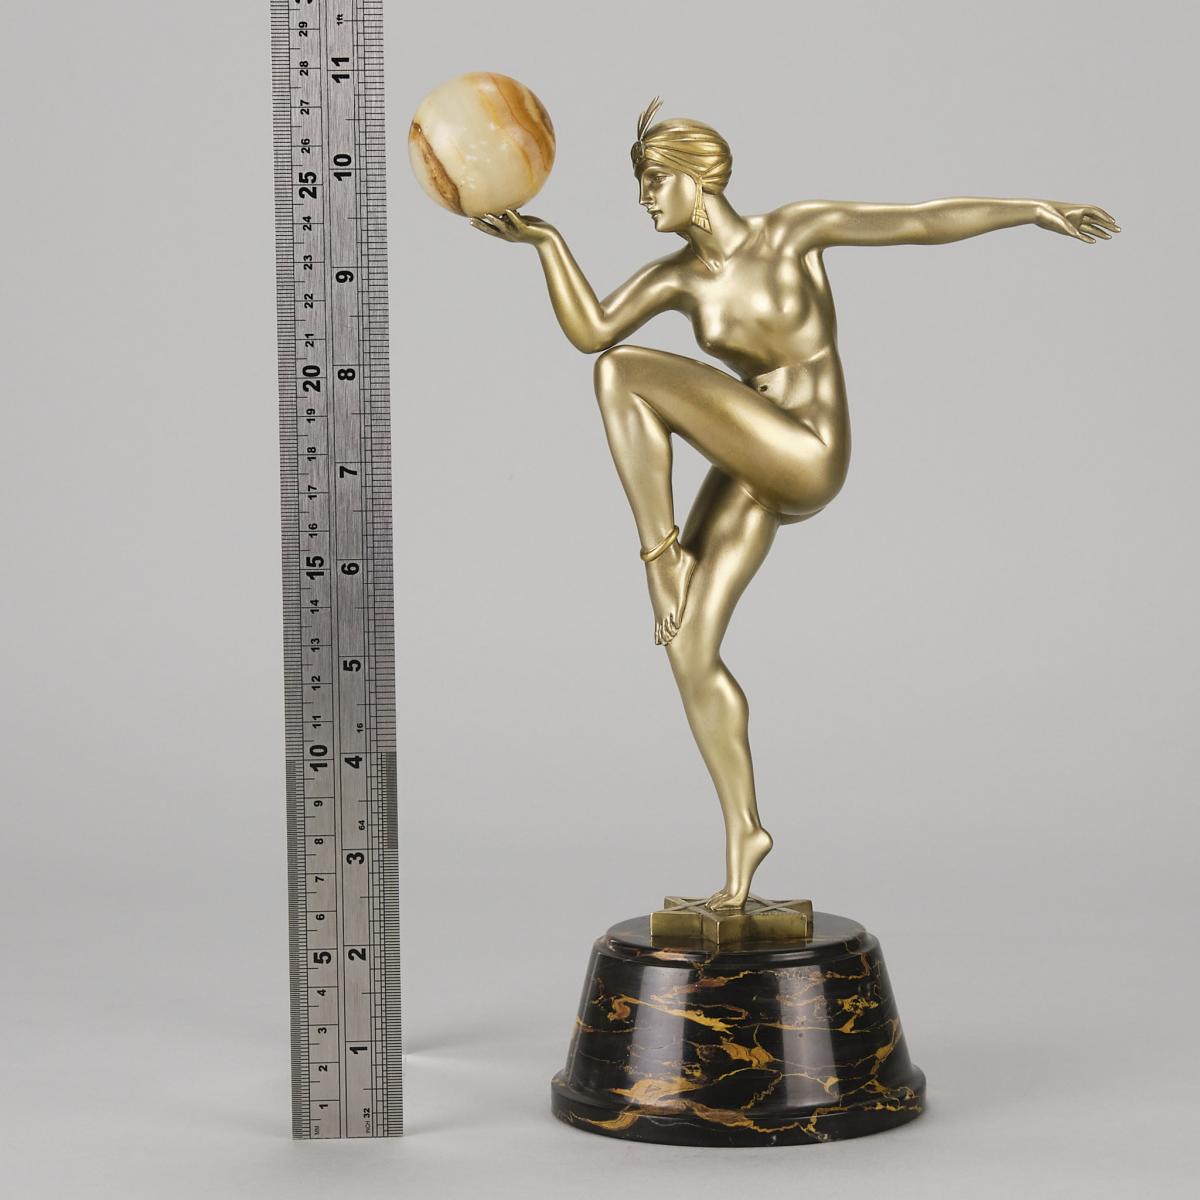  Early 20th Century French Art Deco Bronze entitled "Stella" by Guiraud Rivière